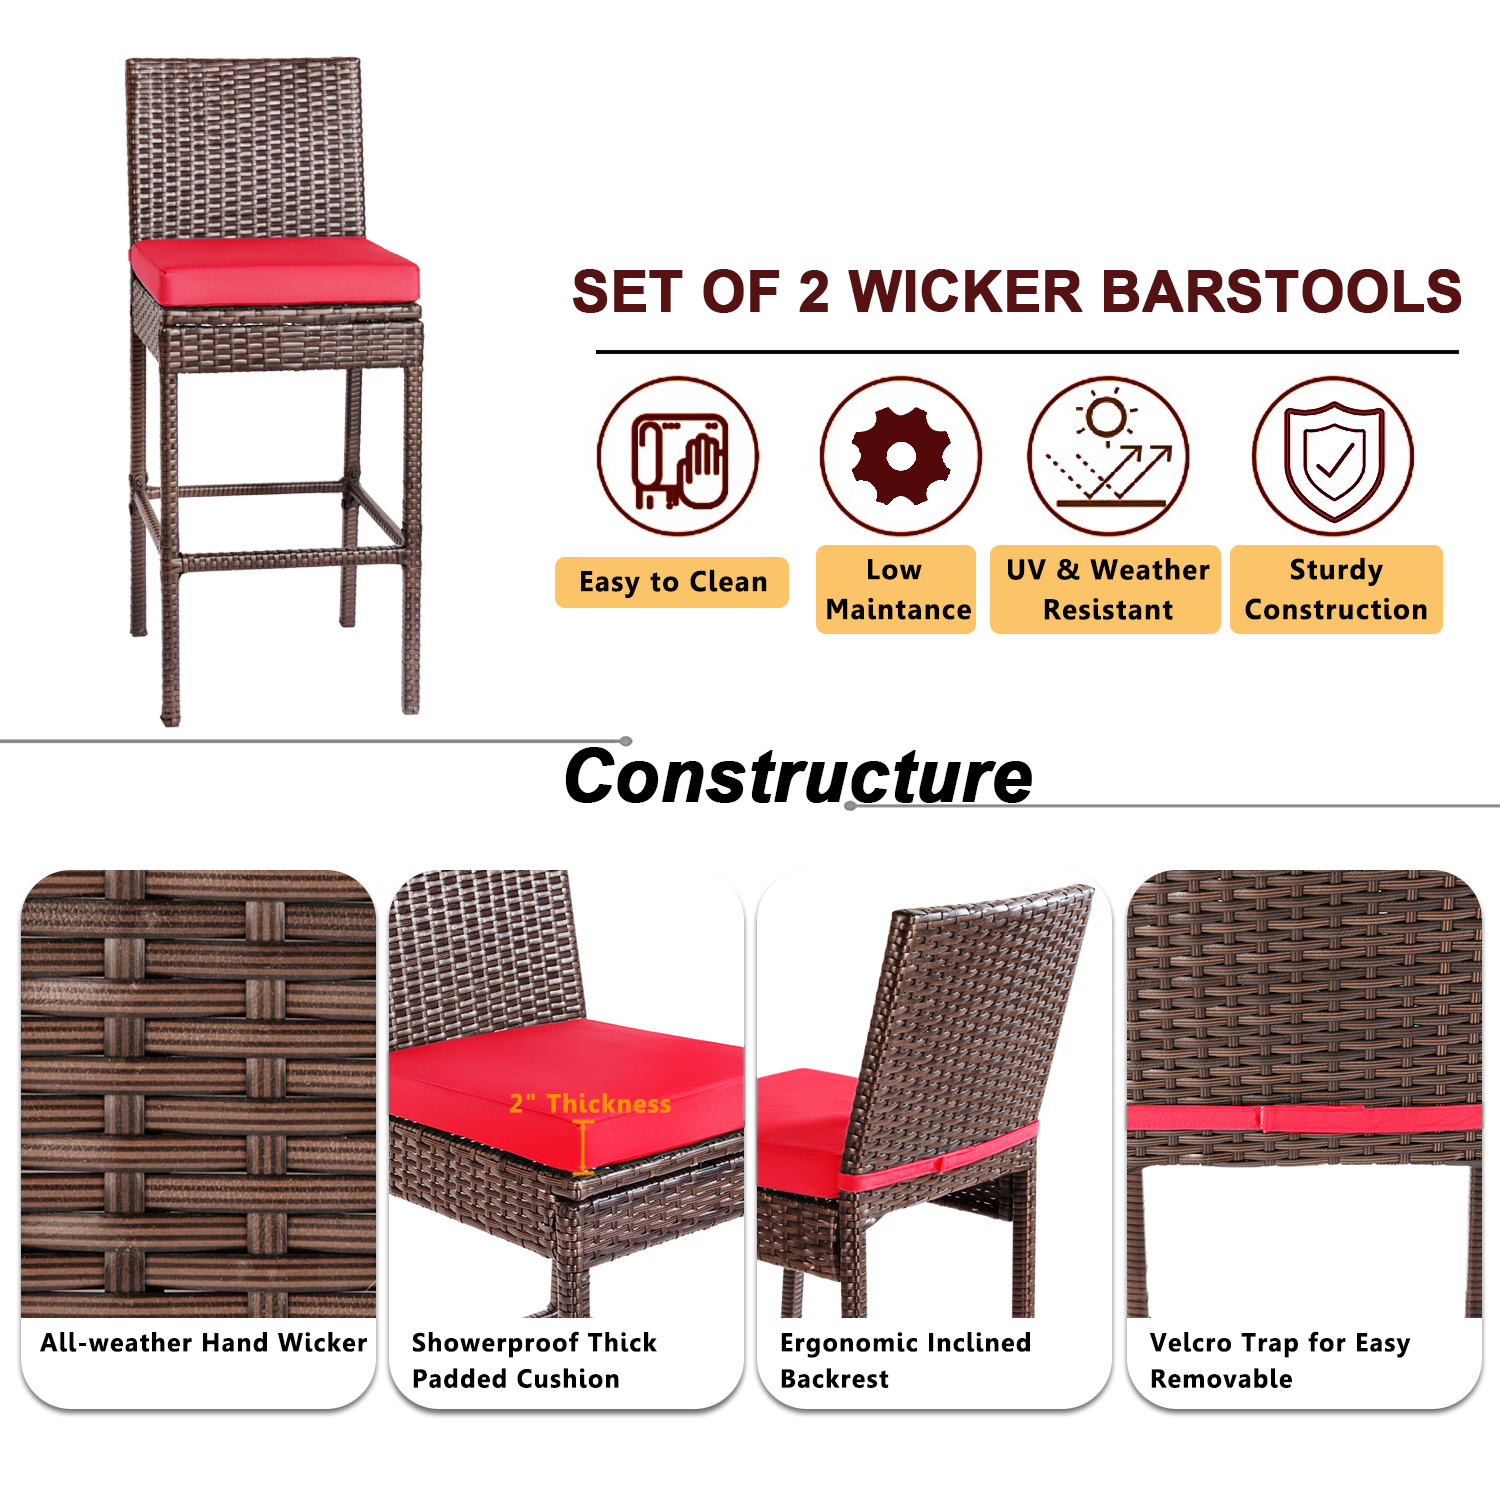 Patio Stools & Bar Chairs Outdoor Wicker Bar Stools Set of 2 Counter Height Bar Stools Patio Chairs Bar Height with Footrest Armless Cushion Red All Weather Rattan for Garden Pool Lawn Backyard - image 5 of 7